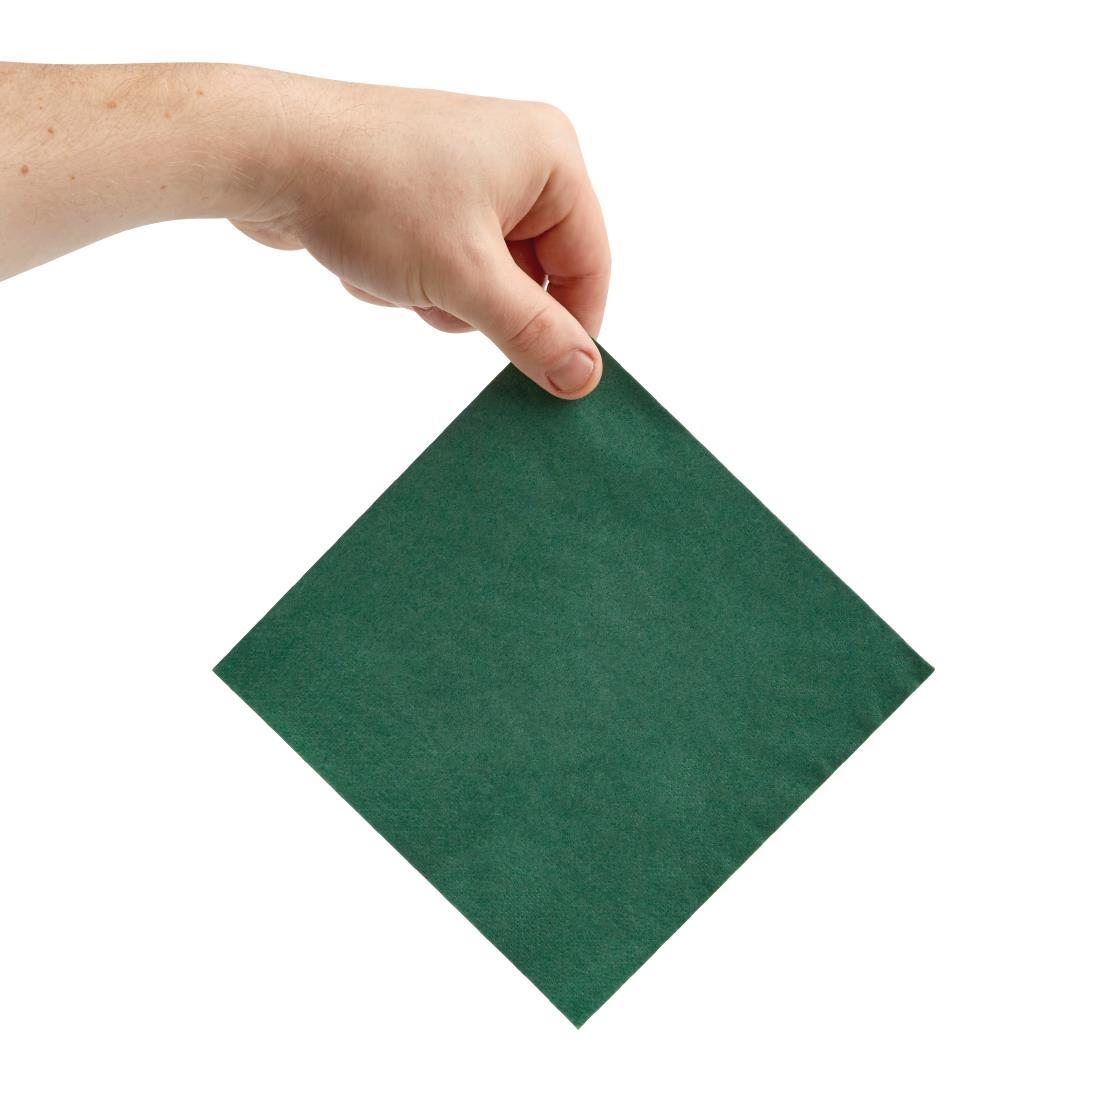 Fiesta Recyclable Lunch Napkin Green 33x33cm 2ply 1/4 Fold (Pack of 2000) - FE223  - 3